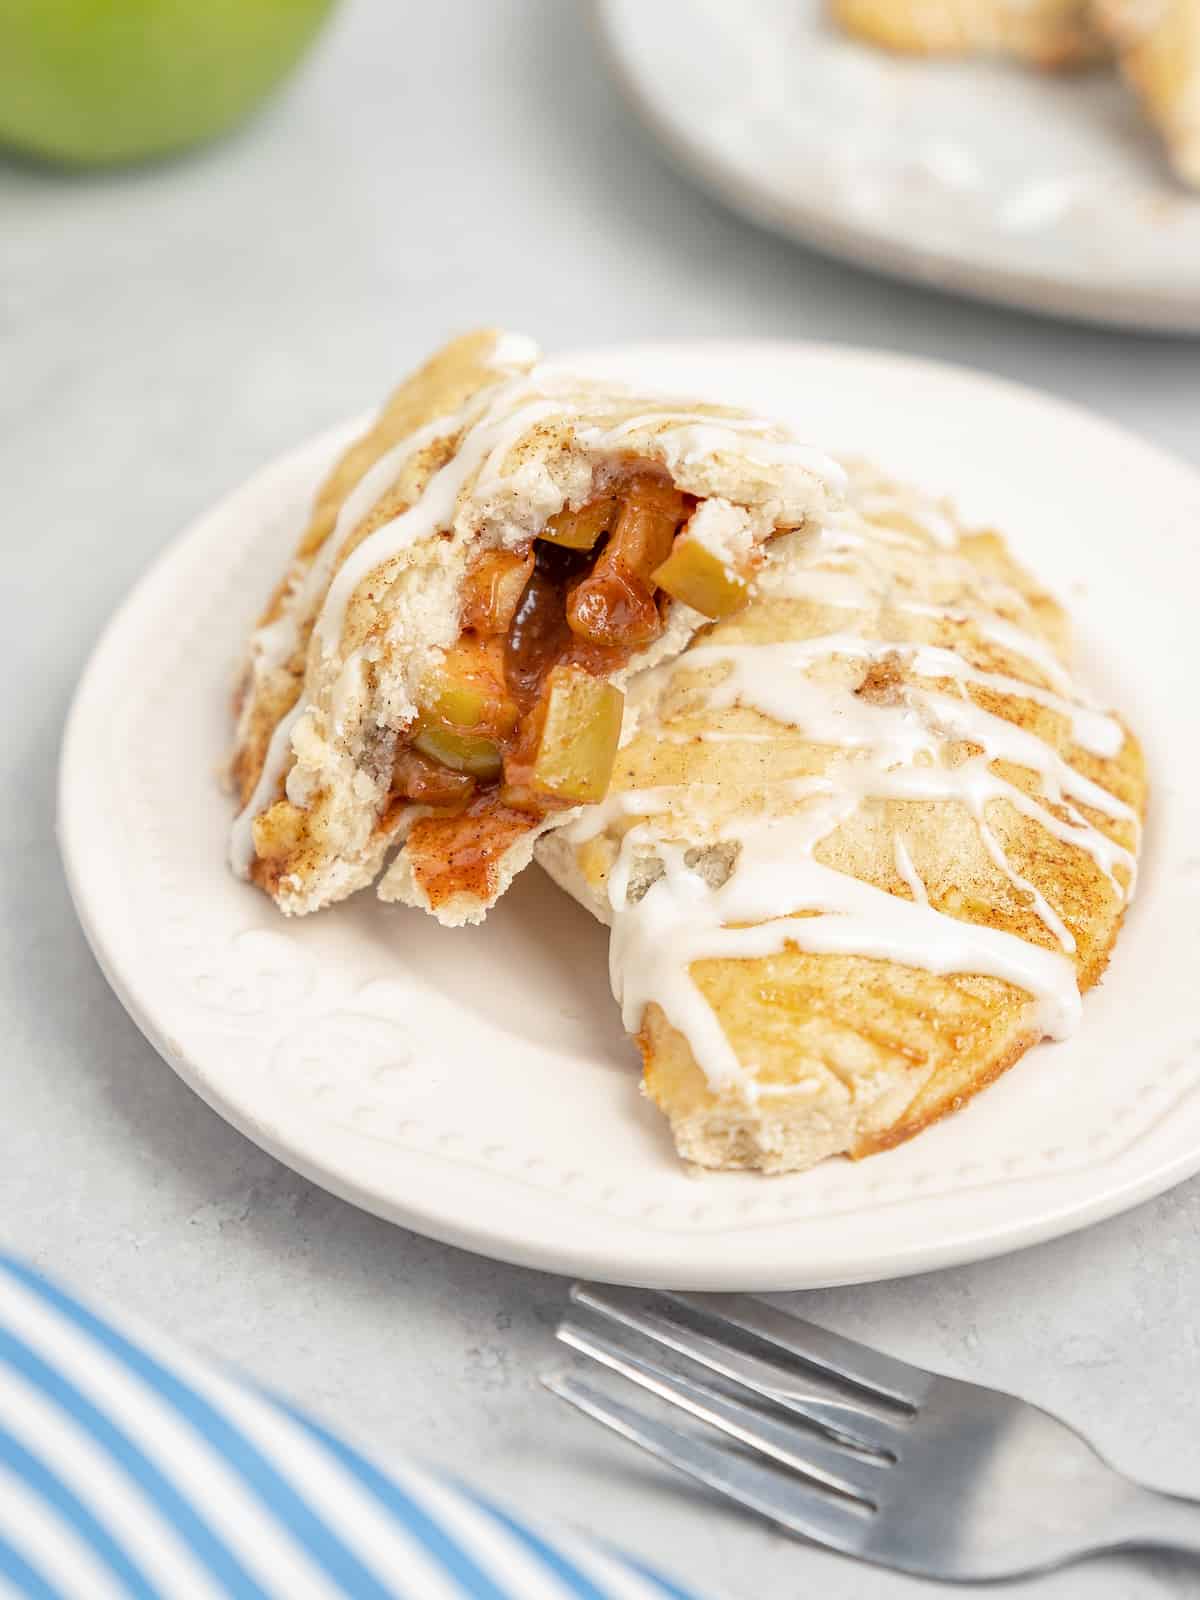 Two halves of an apple turnover on a white plate.